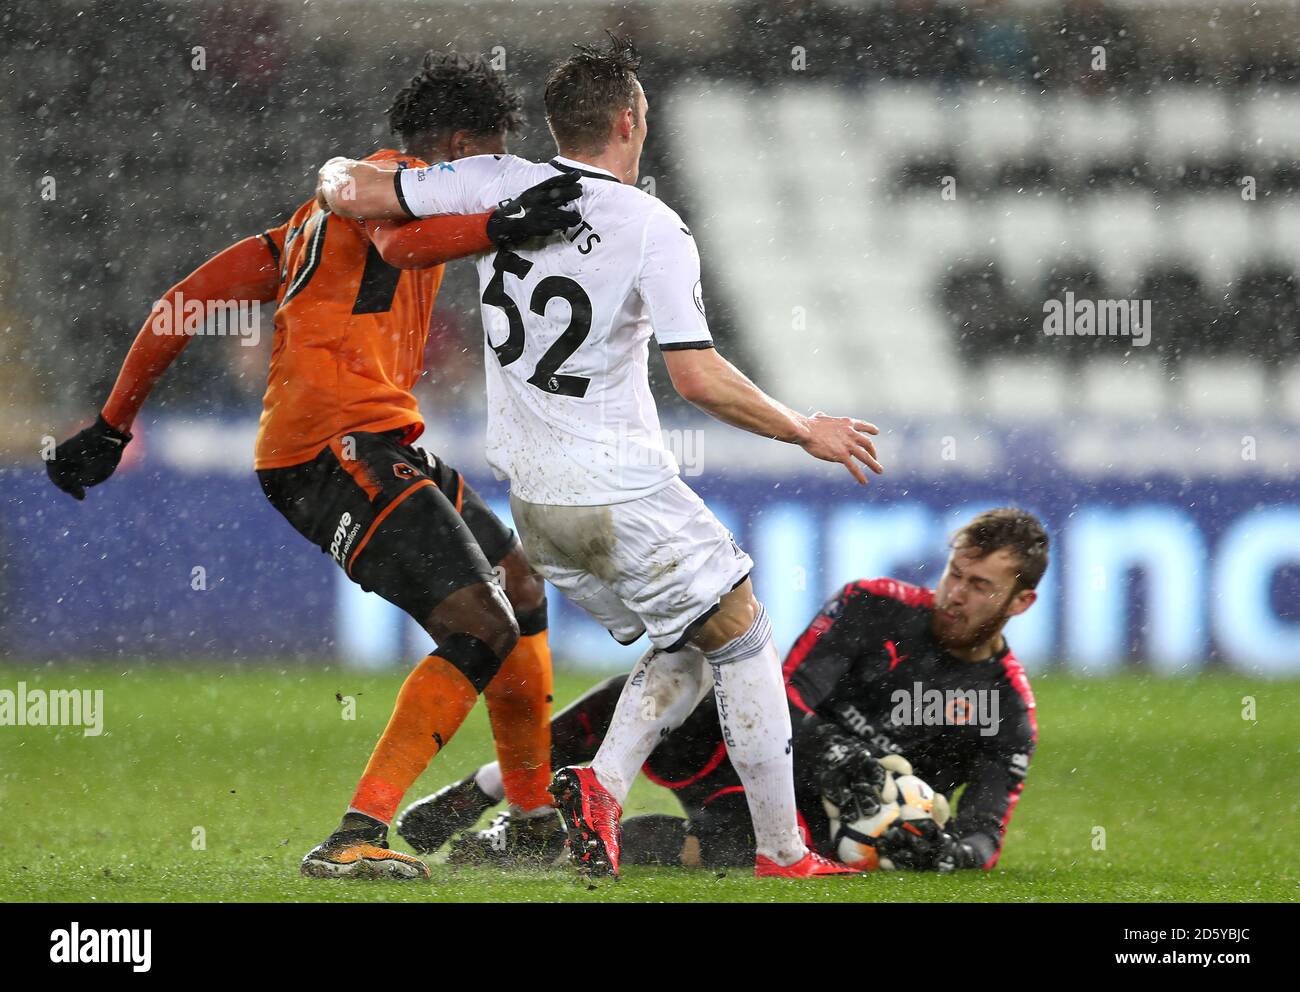 Wolverhampton Wanderers' Kortney Hause (left) battles for the ball with Swansea City's Connor Roberts and Goalkeeper Kristoffer Nordfeldt (right) Stock Photo